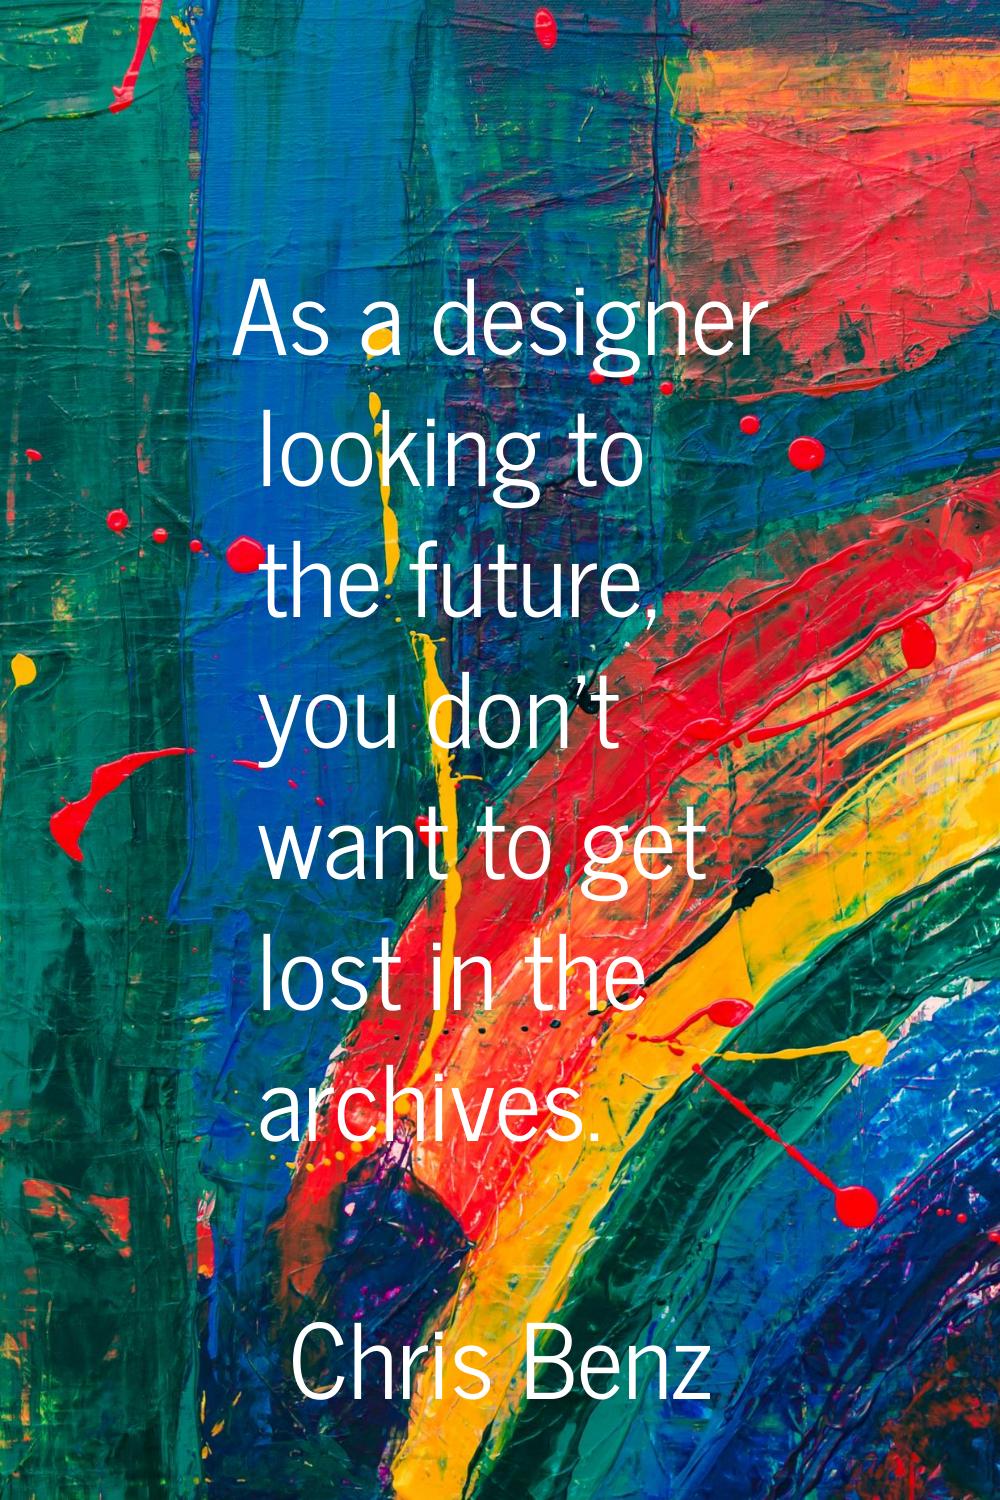 As a designer looking to the future, you don't want to get lost in the archives.